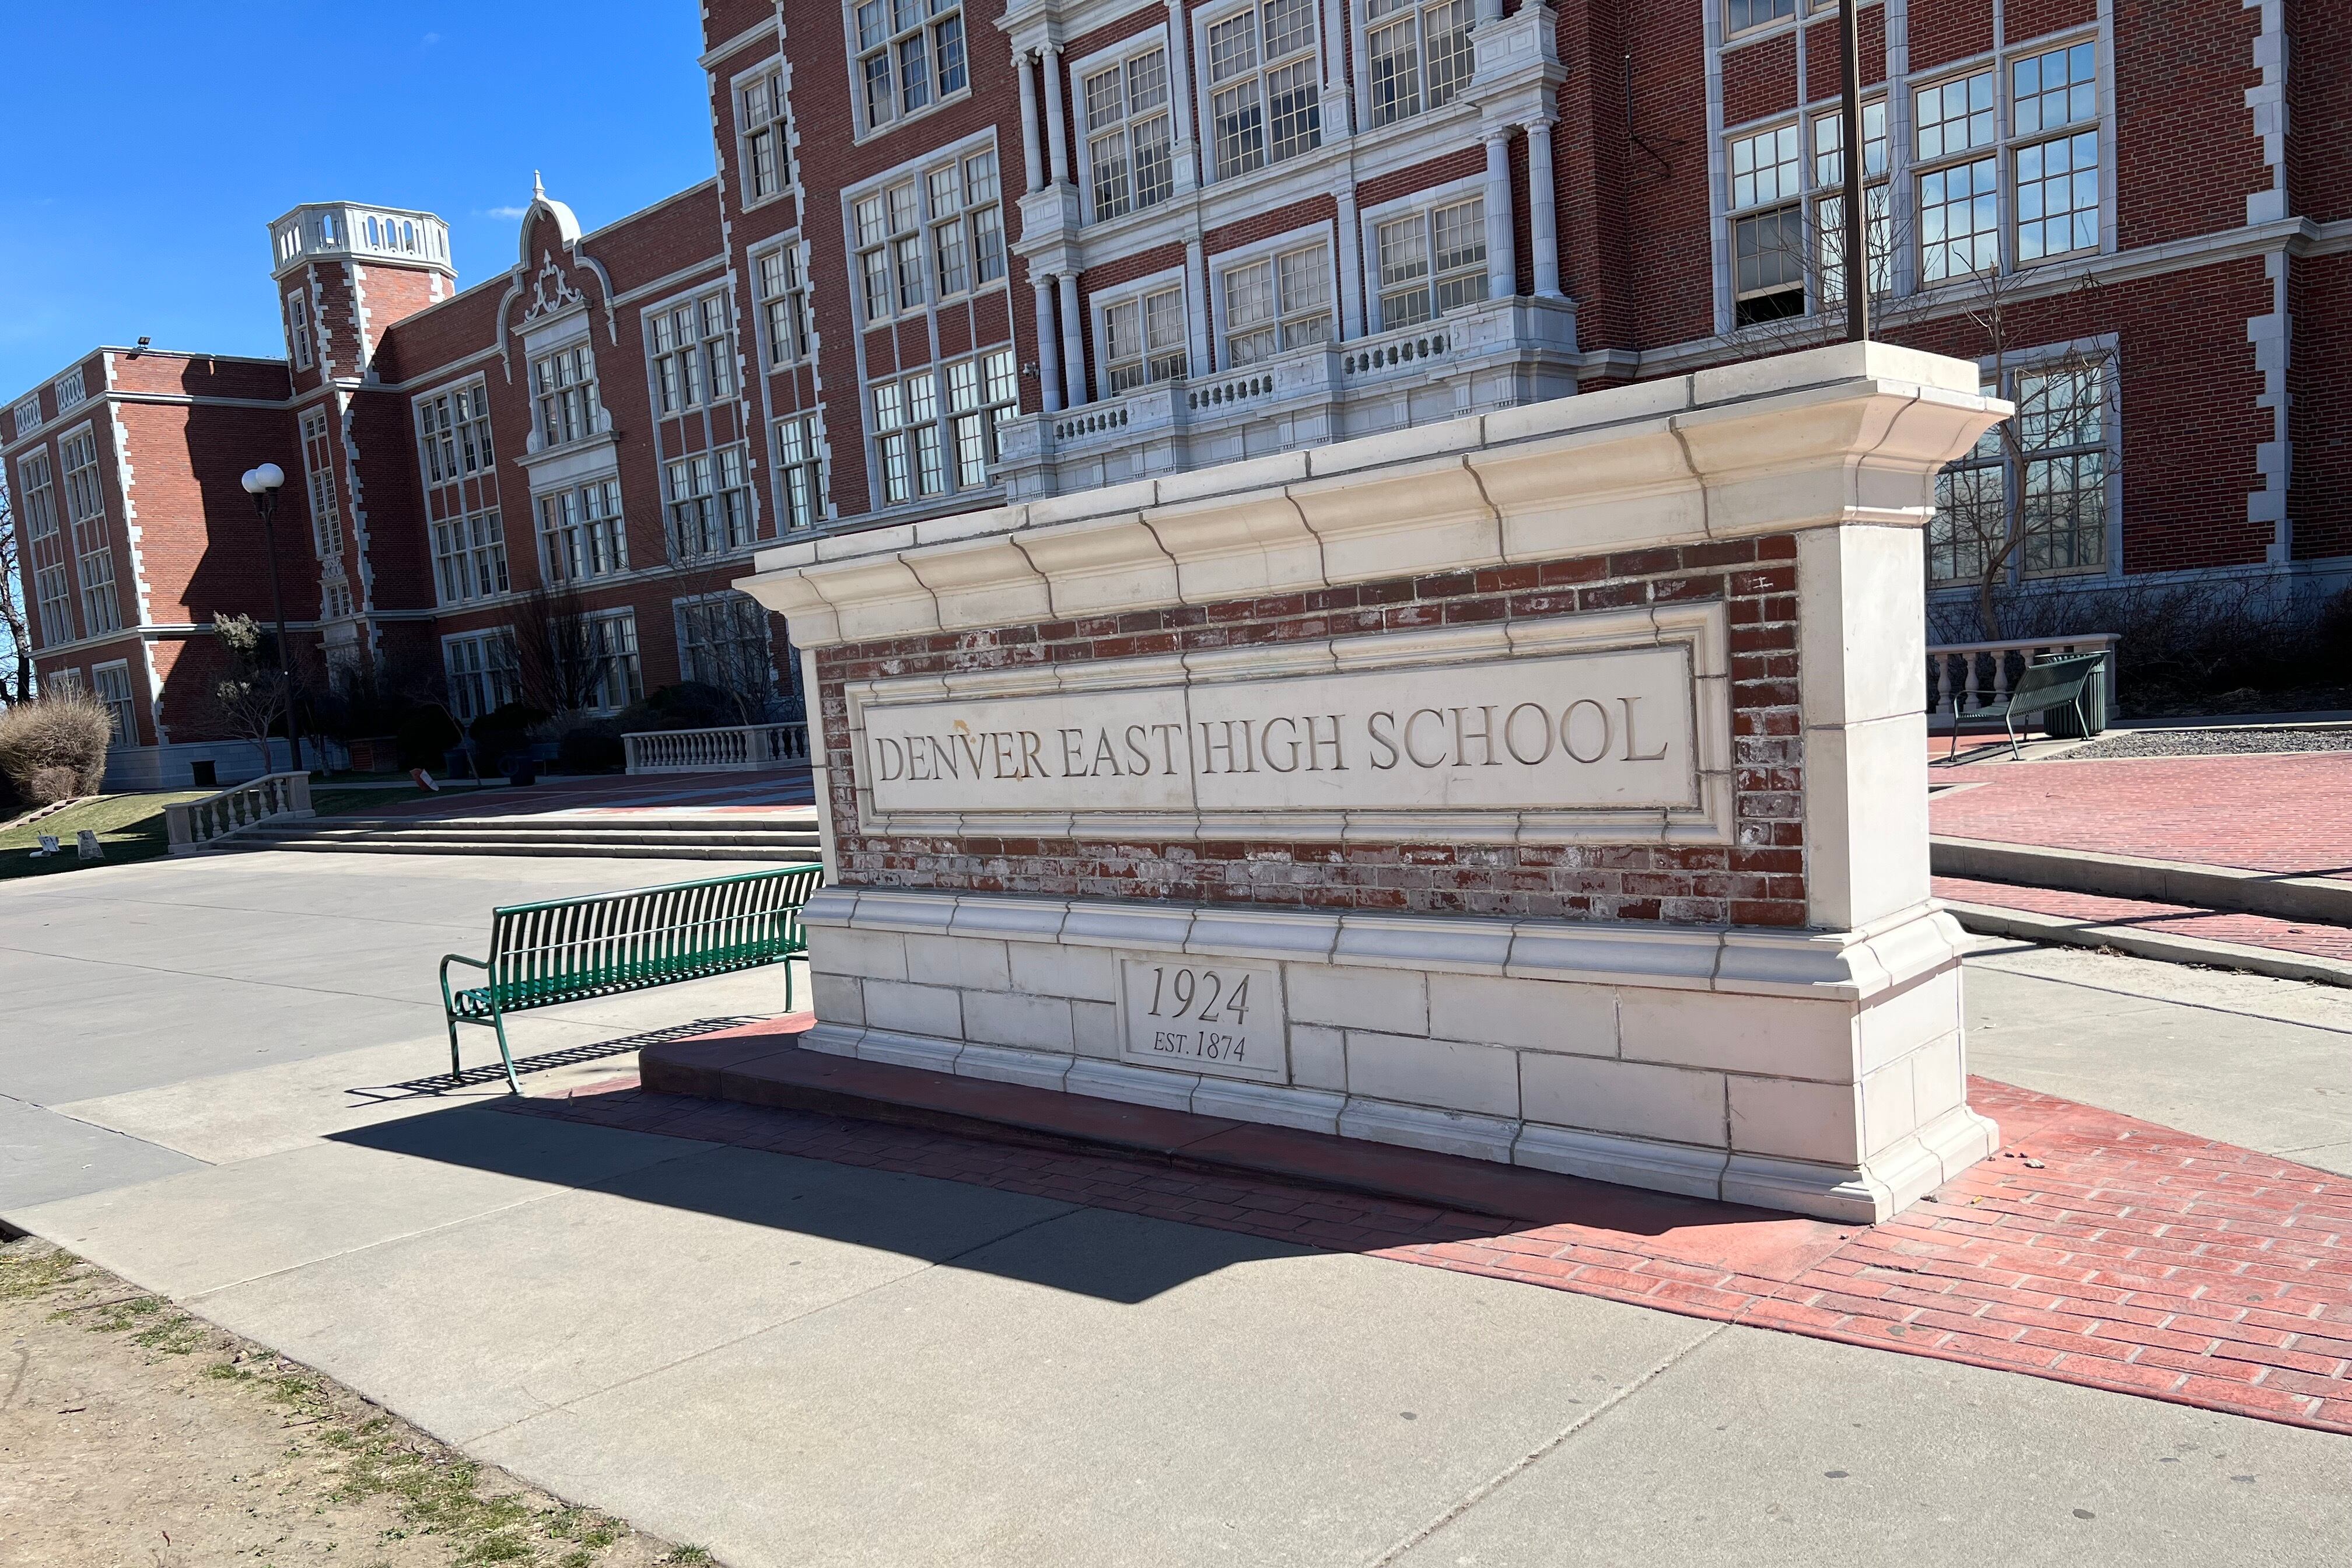 A stone sign that says “Denver East High School” sits outside a brick school building.